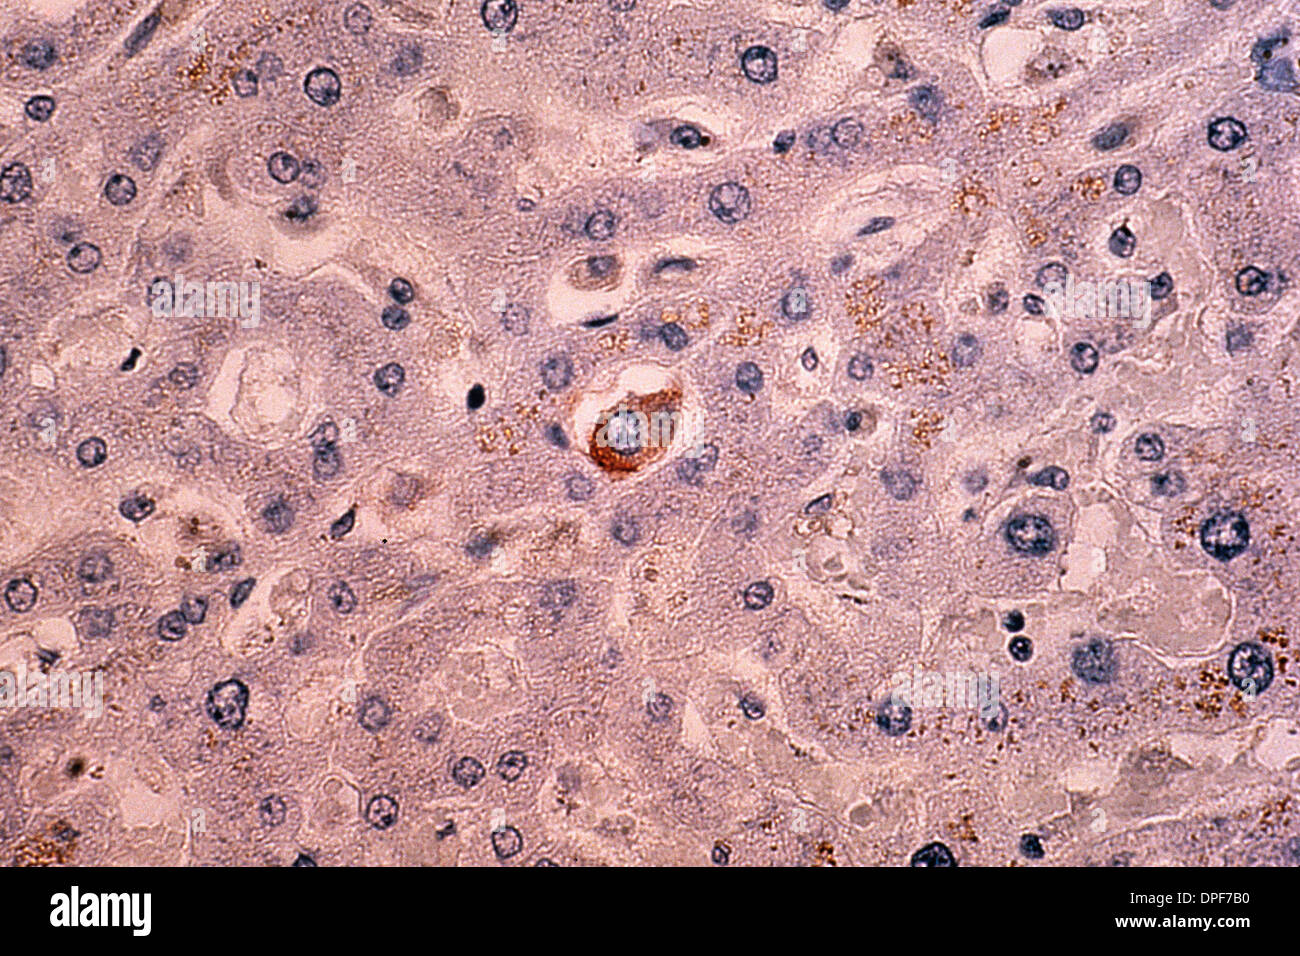 Light micrograph of metastases in breast tissue Stock Photo